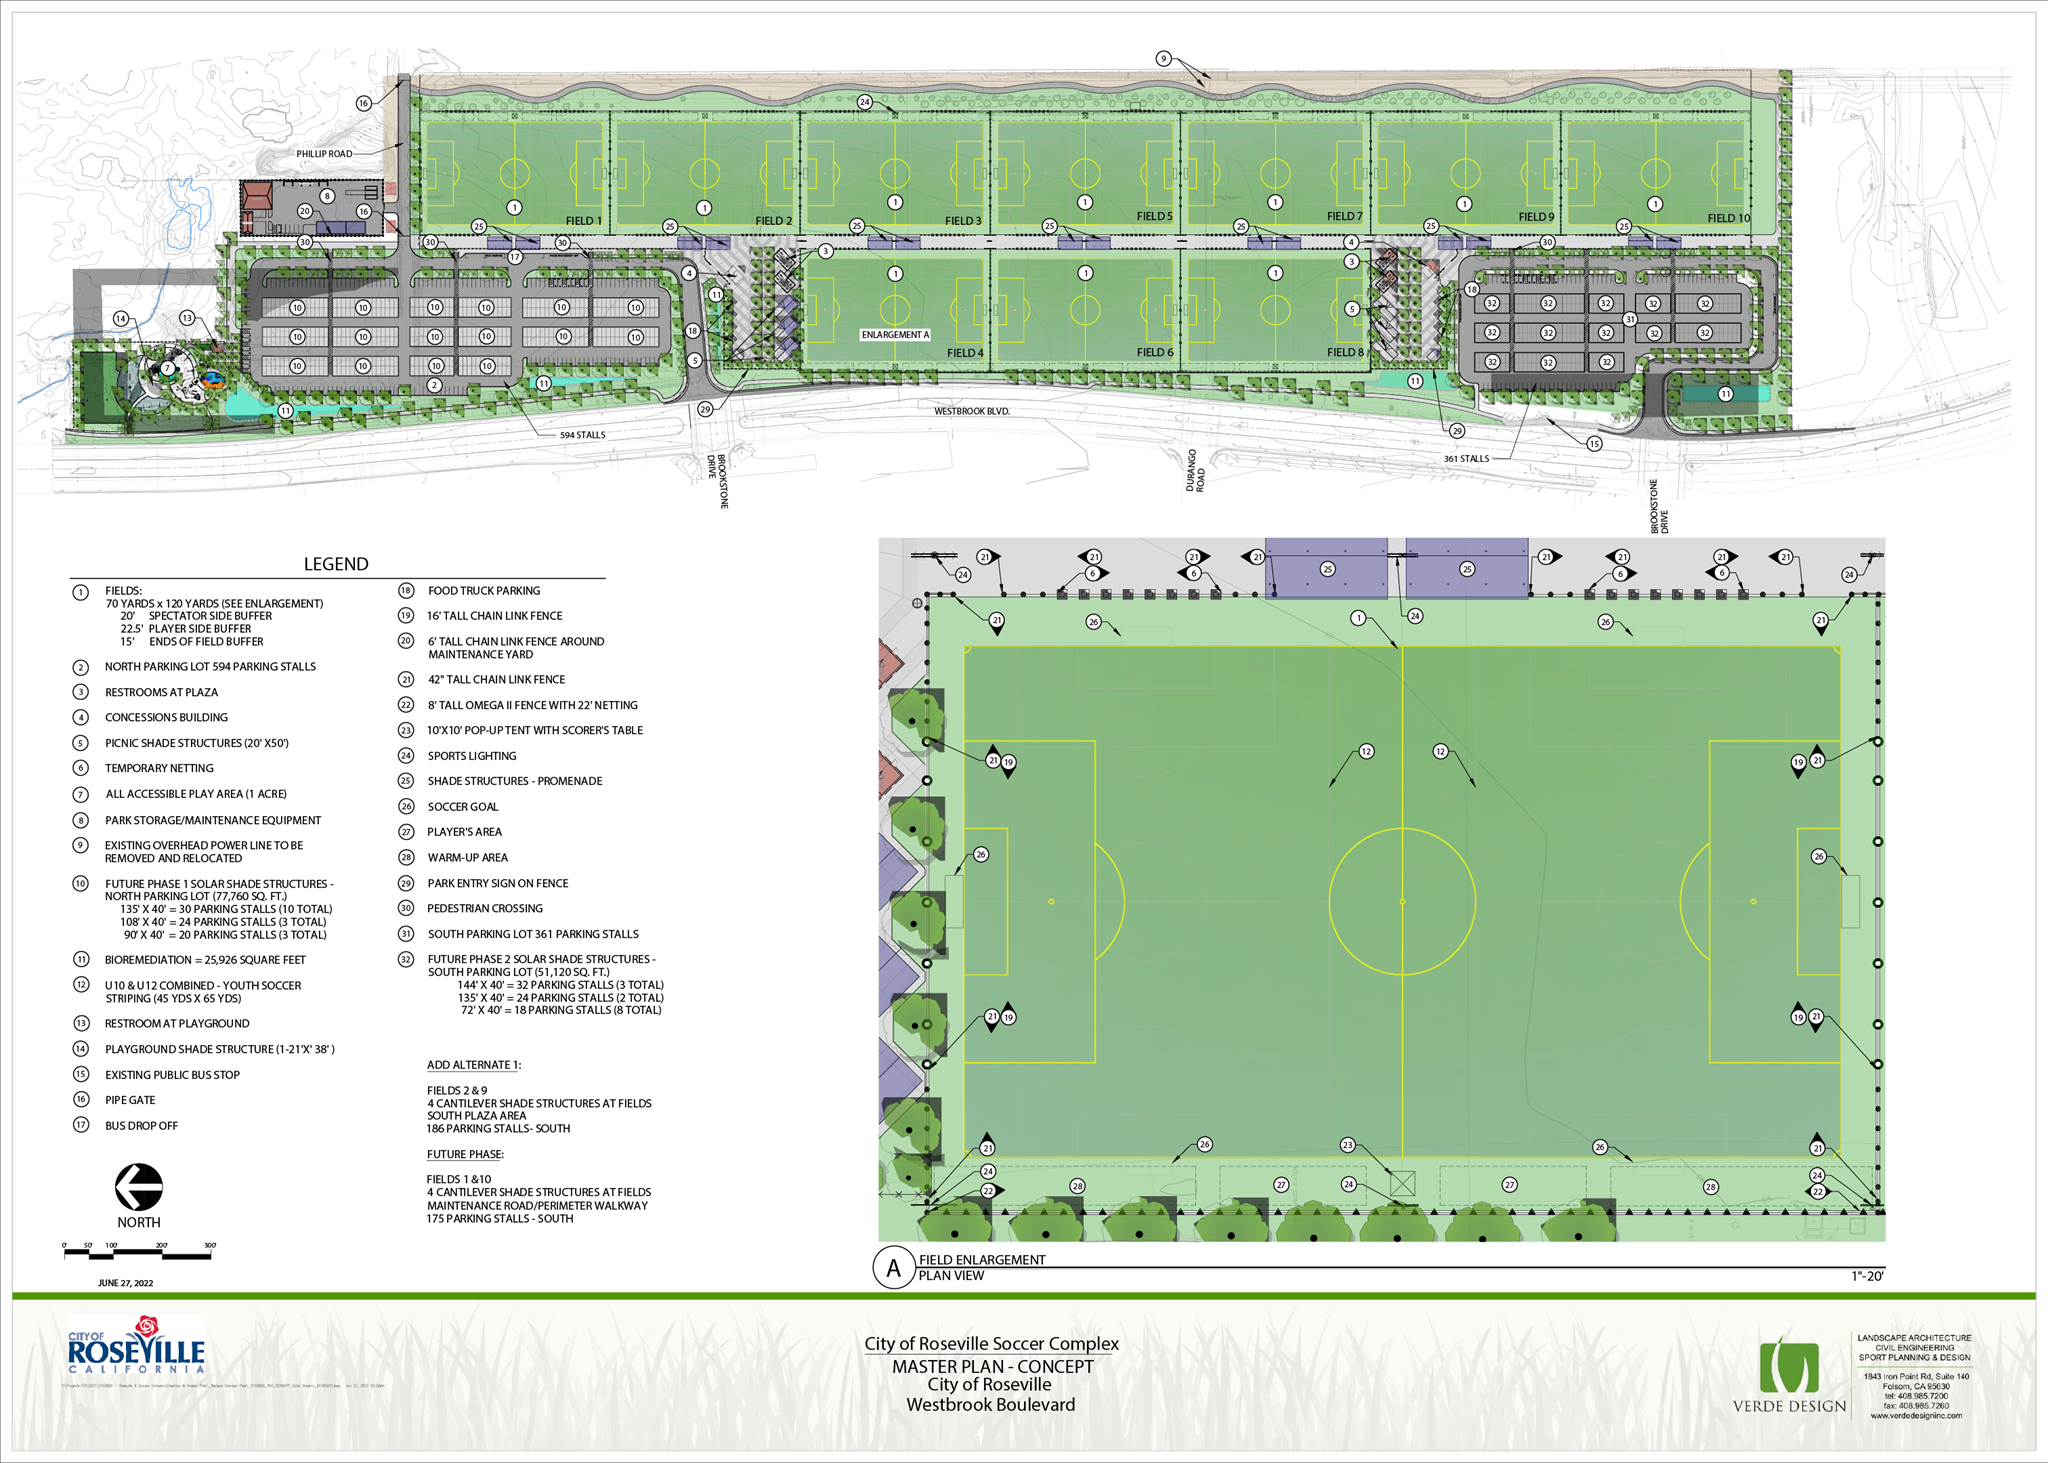 More information about "Subsequent Initial Study/Mitigated Negative Declaration (environmental report) for the Roseville Regional Soccer Complex Project is available for public review"